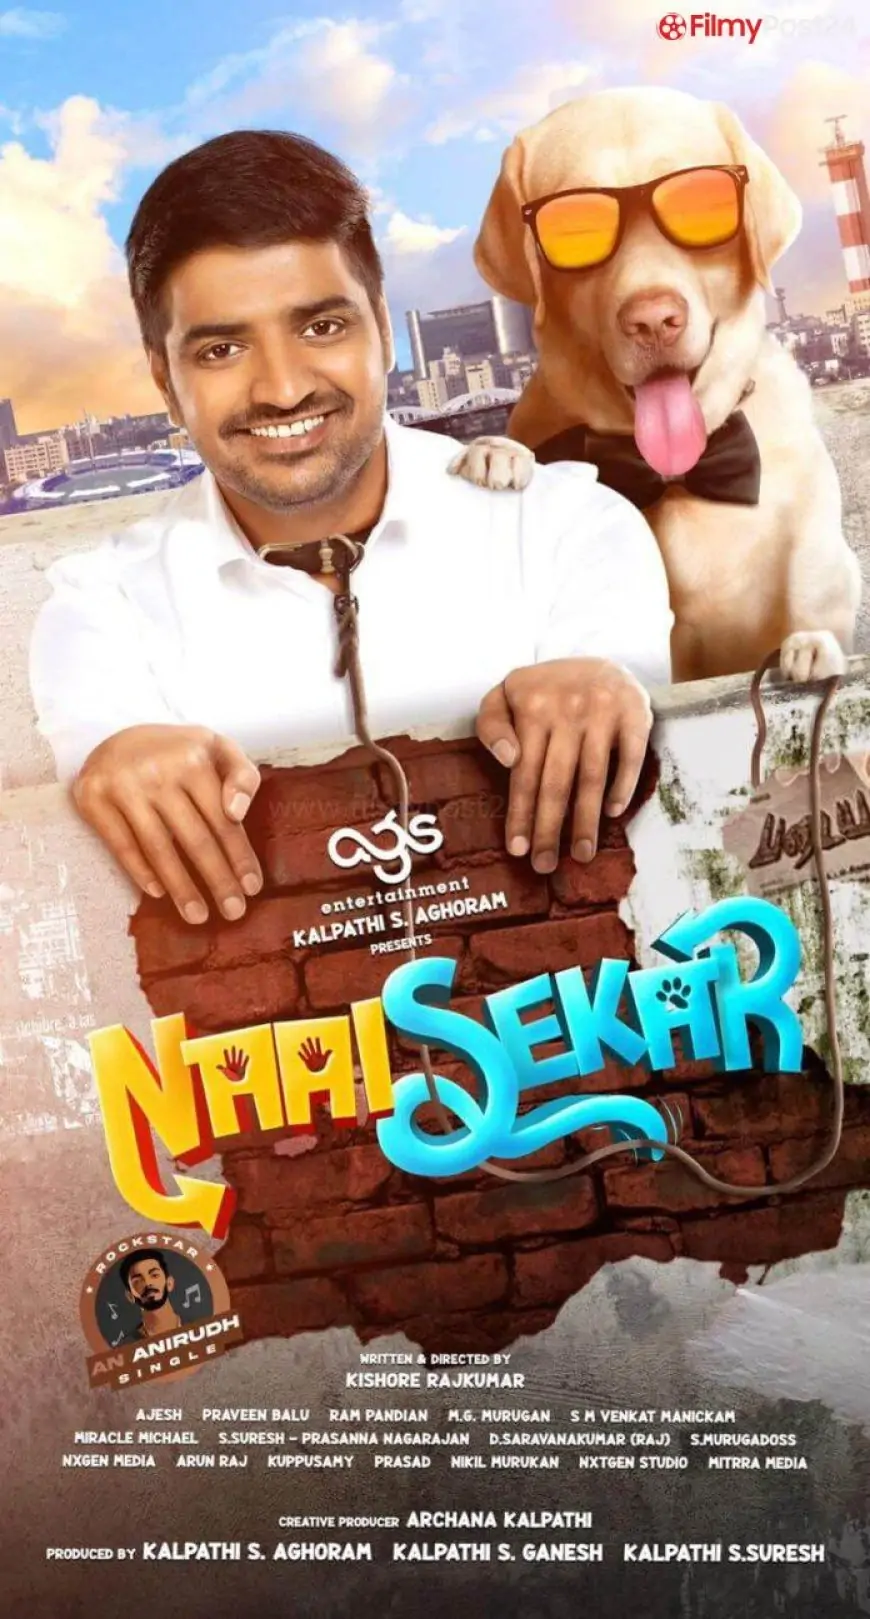 Naai Sekar Film (2022) Forged, Roles, Trailer, Story, Launch Date, Poster